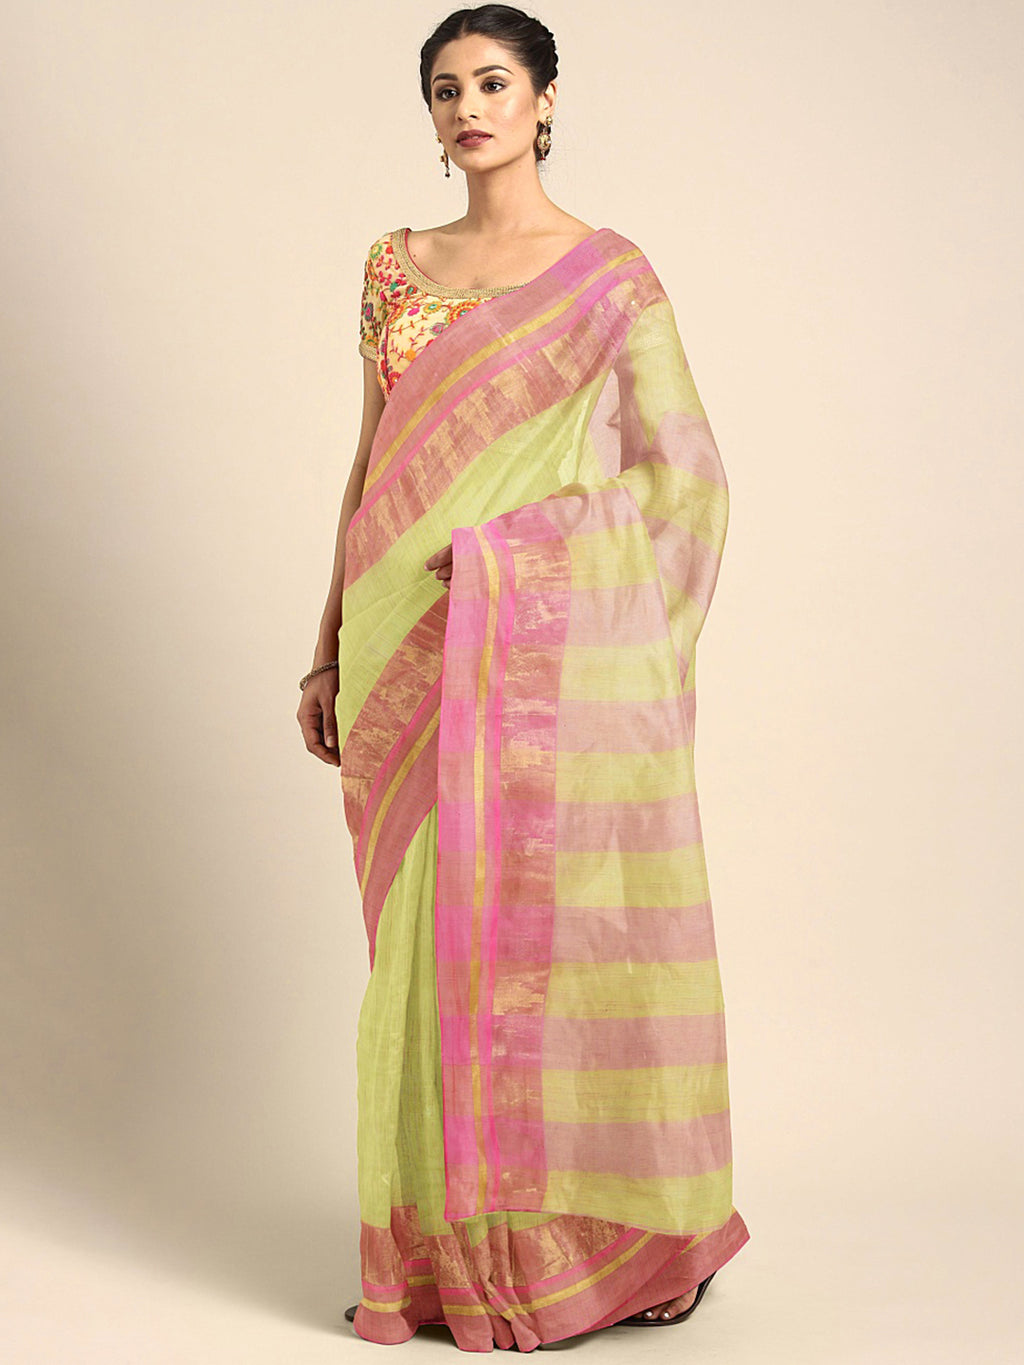 Yellow Tant Woven Design Saree Without Blouse Piece DUTASA027 DUTASA027-Saree-Kalakari India-DUTASA027-Geographical Indication, Hand Crafted, Heritage Prints, Natural Dyes, Sarees, Silk Cotton, Sustainable Fabrics, Taant, Tant, West Bengal, Woven-[Linen,Ethnic,wear,Fashionista,Handloom,Handicraft,Indigo,blockprint,block,print,Cotton,Chanderi,Blue, latest,classy,party,bollywood,trendy,summer,style,traditional,formal,elegant,unique,style,hand,block,print, dabu,booti,gift,present,glamorous,affordab